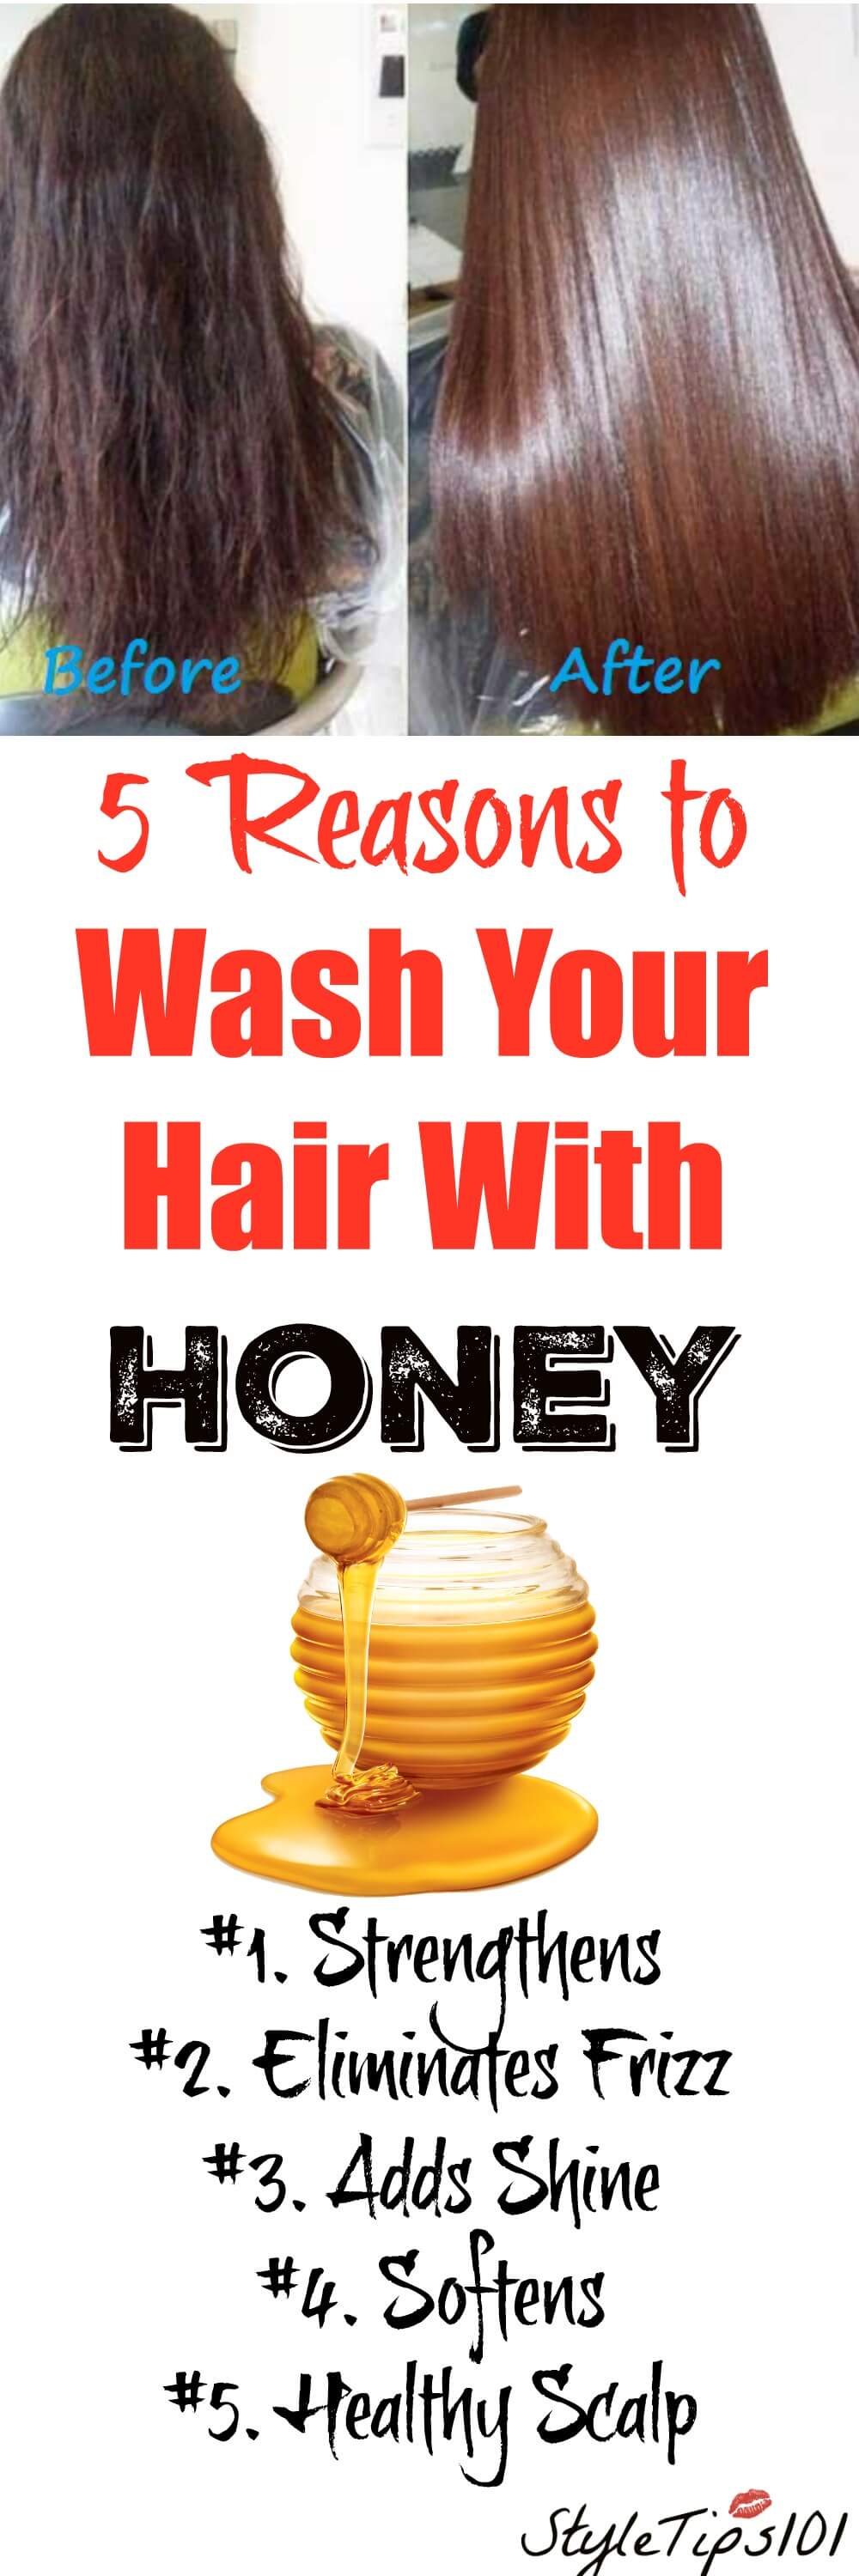 Wash Your Hair With Honey